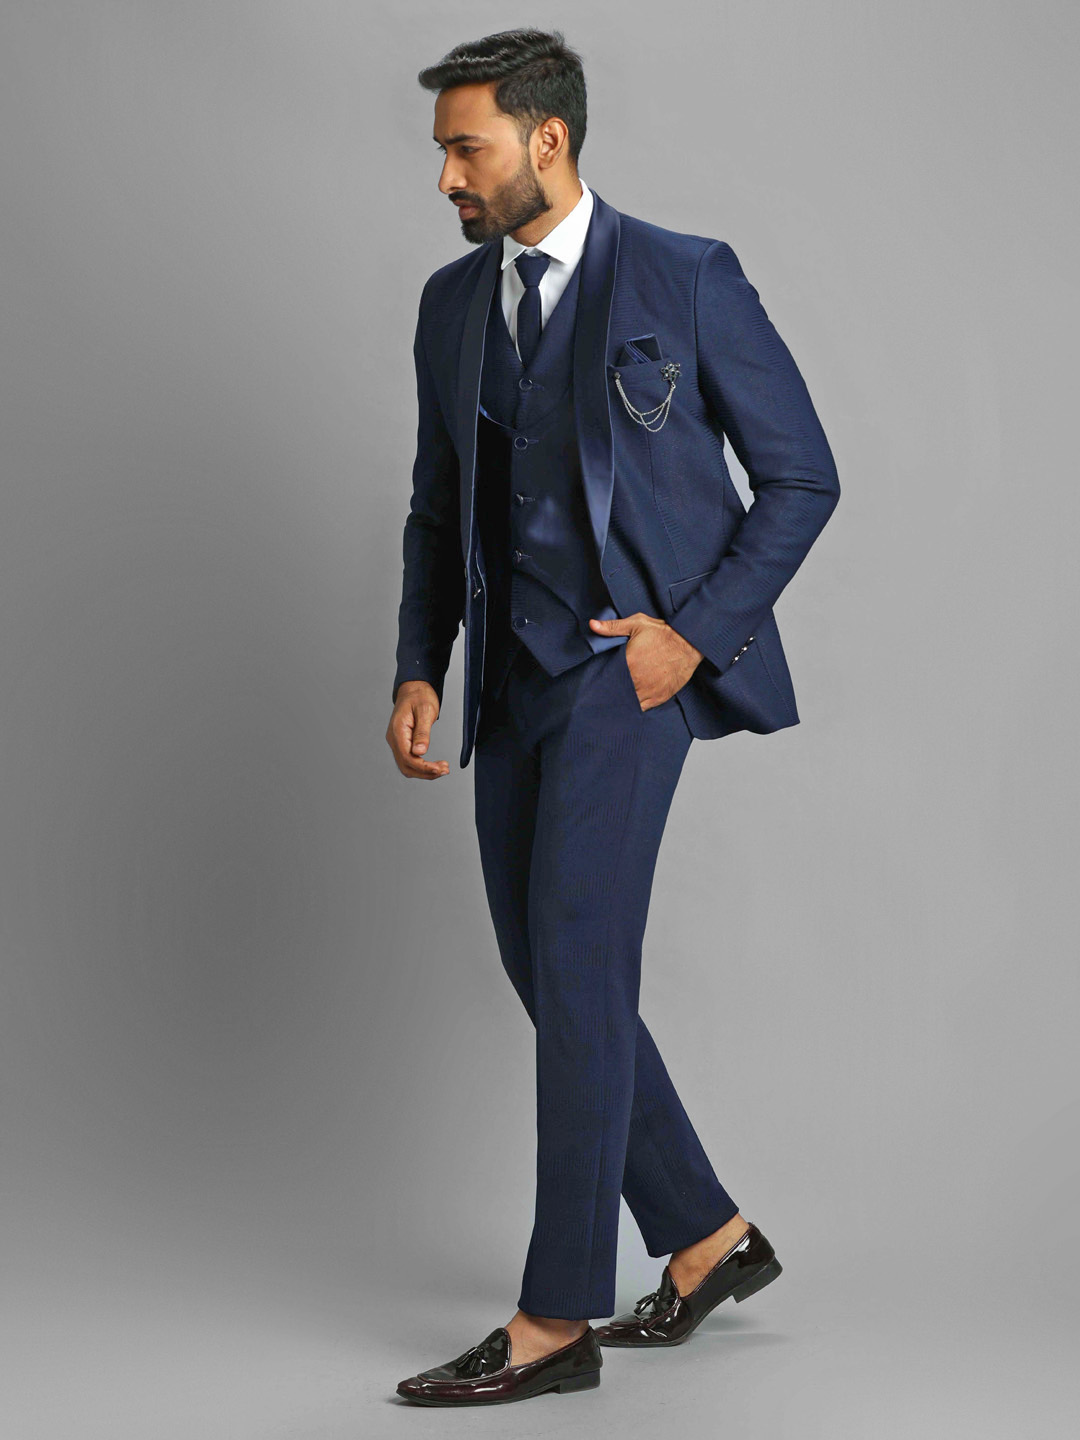 https://candidmen.in/static/ecommerce/img/products/site_images/blue-shiny-textured-print-3-piece-suit_medium_4.jpg